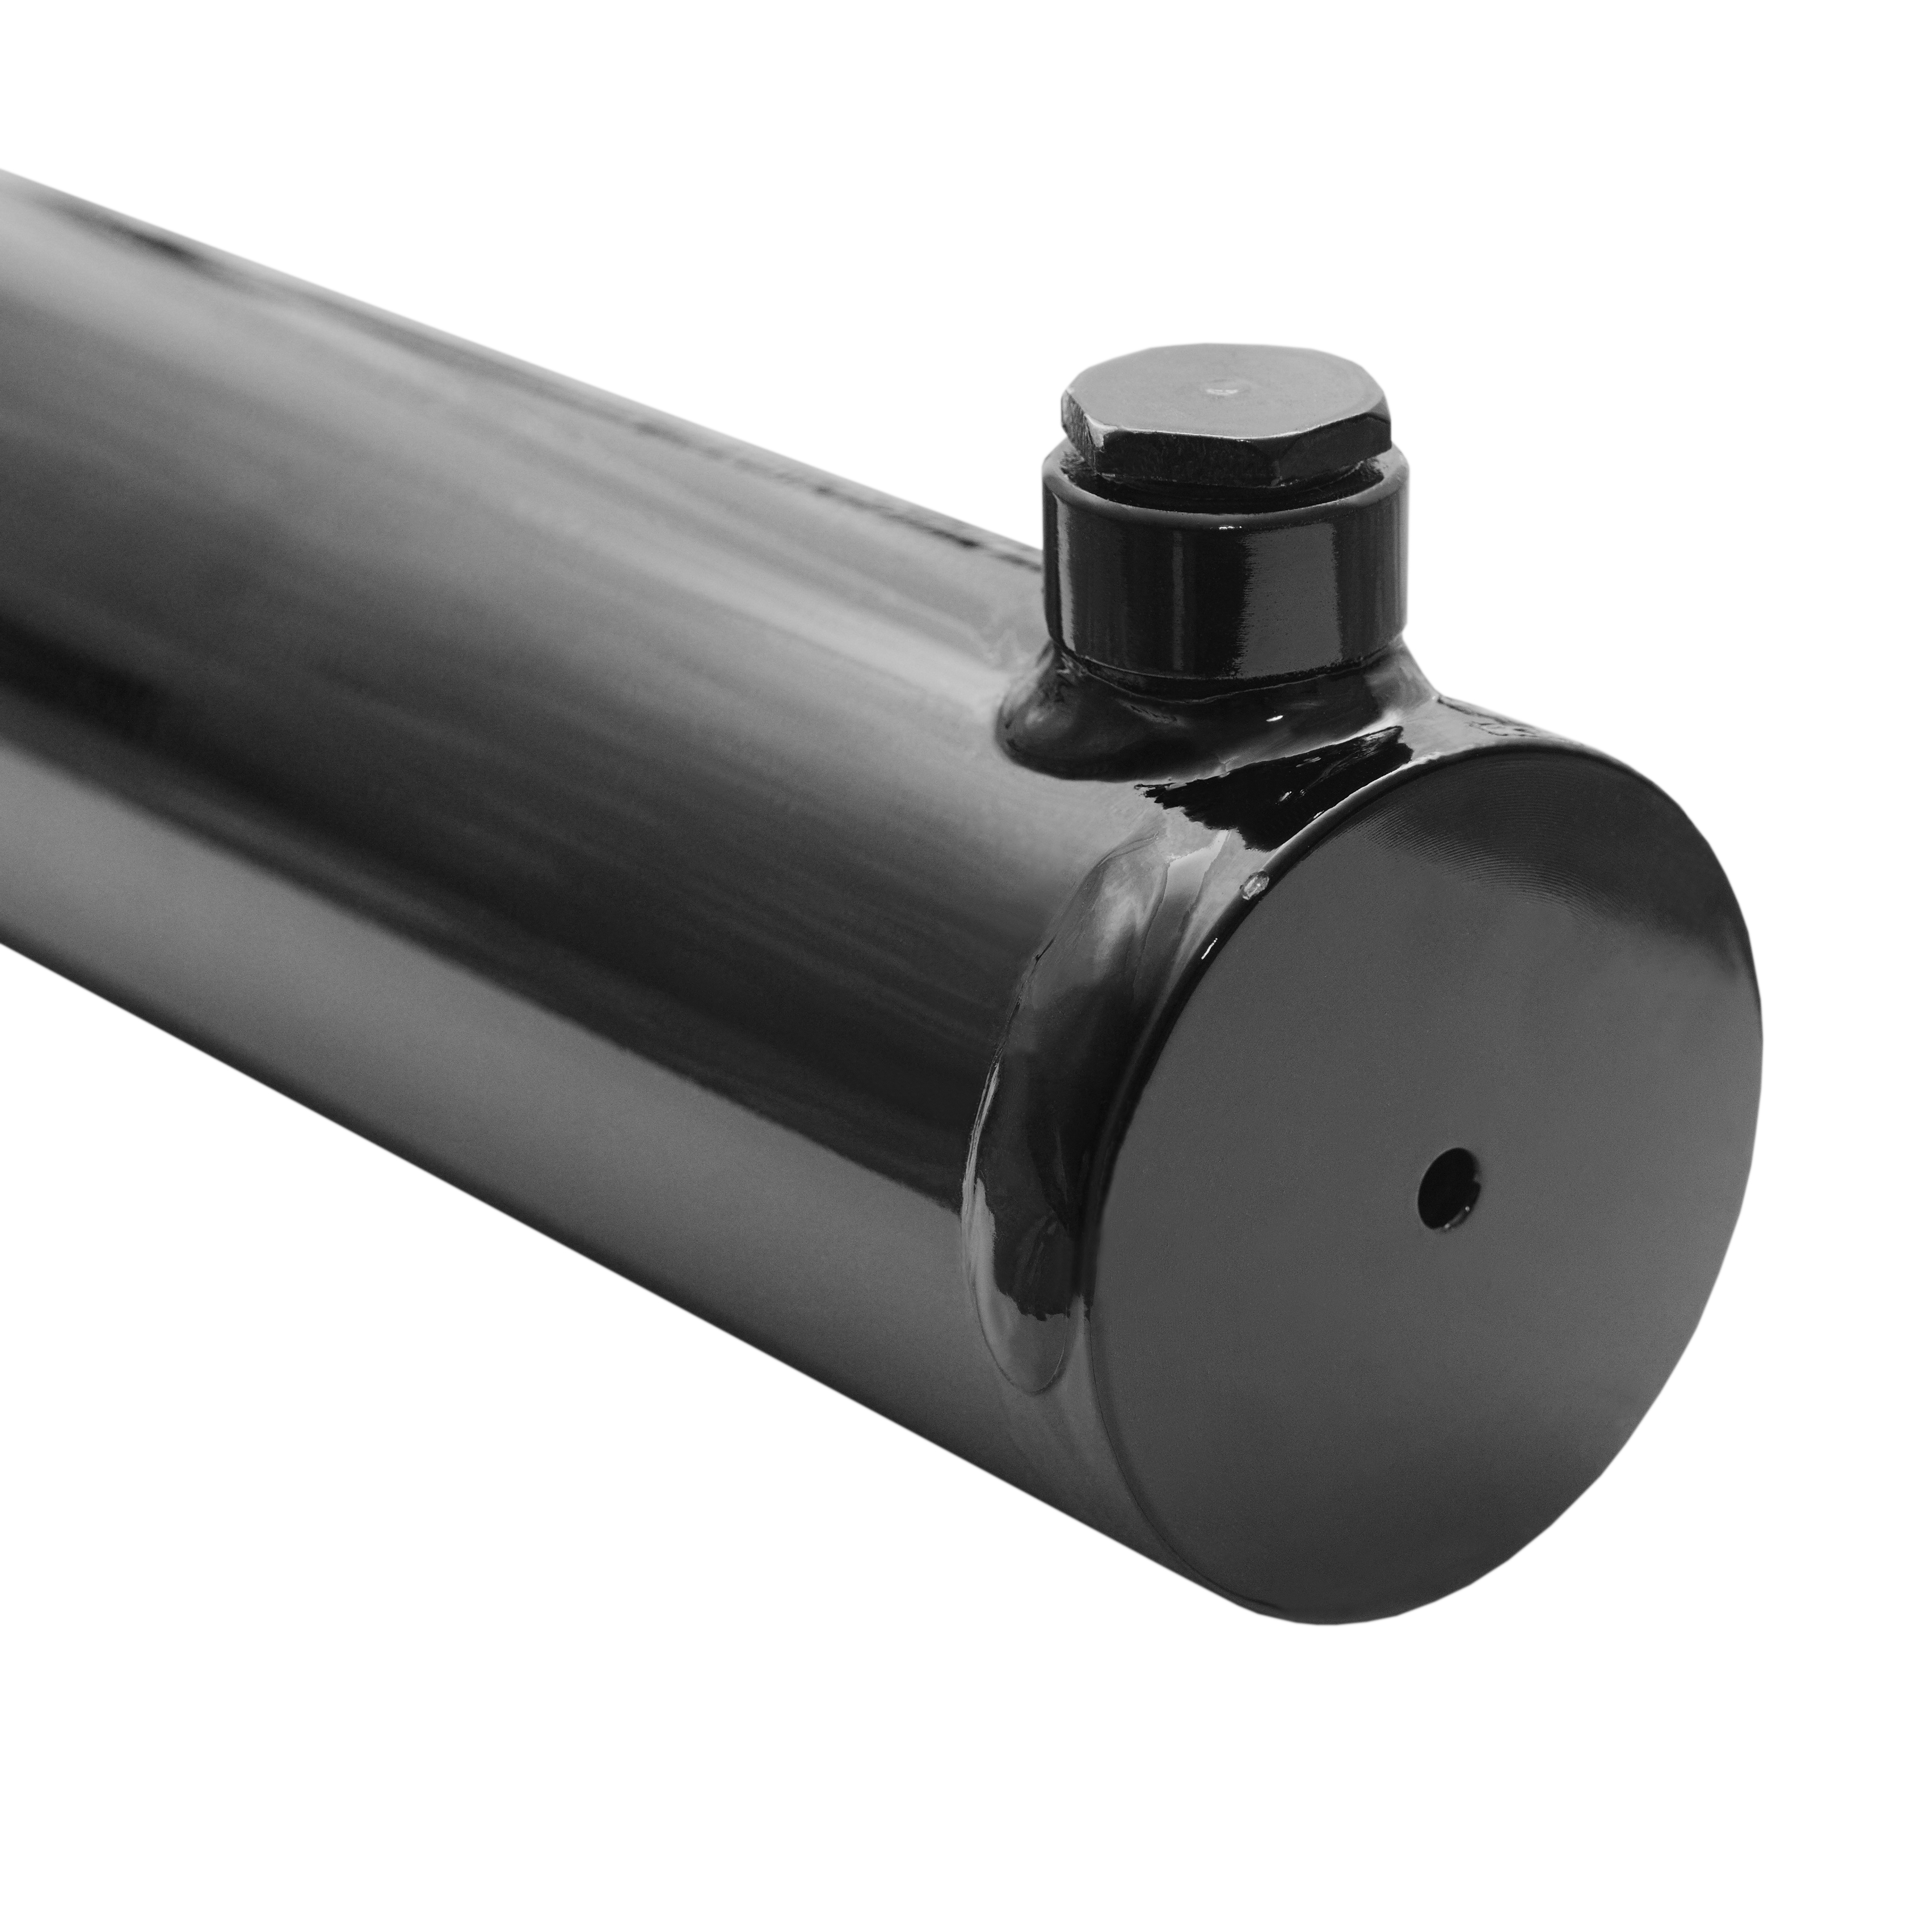 Magister Hydraulics WCT 2x18 2" Bore x 18" Stroke Cross Tube Hydraulic Cylinder for sale online 